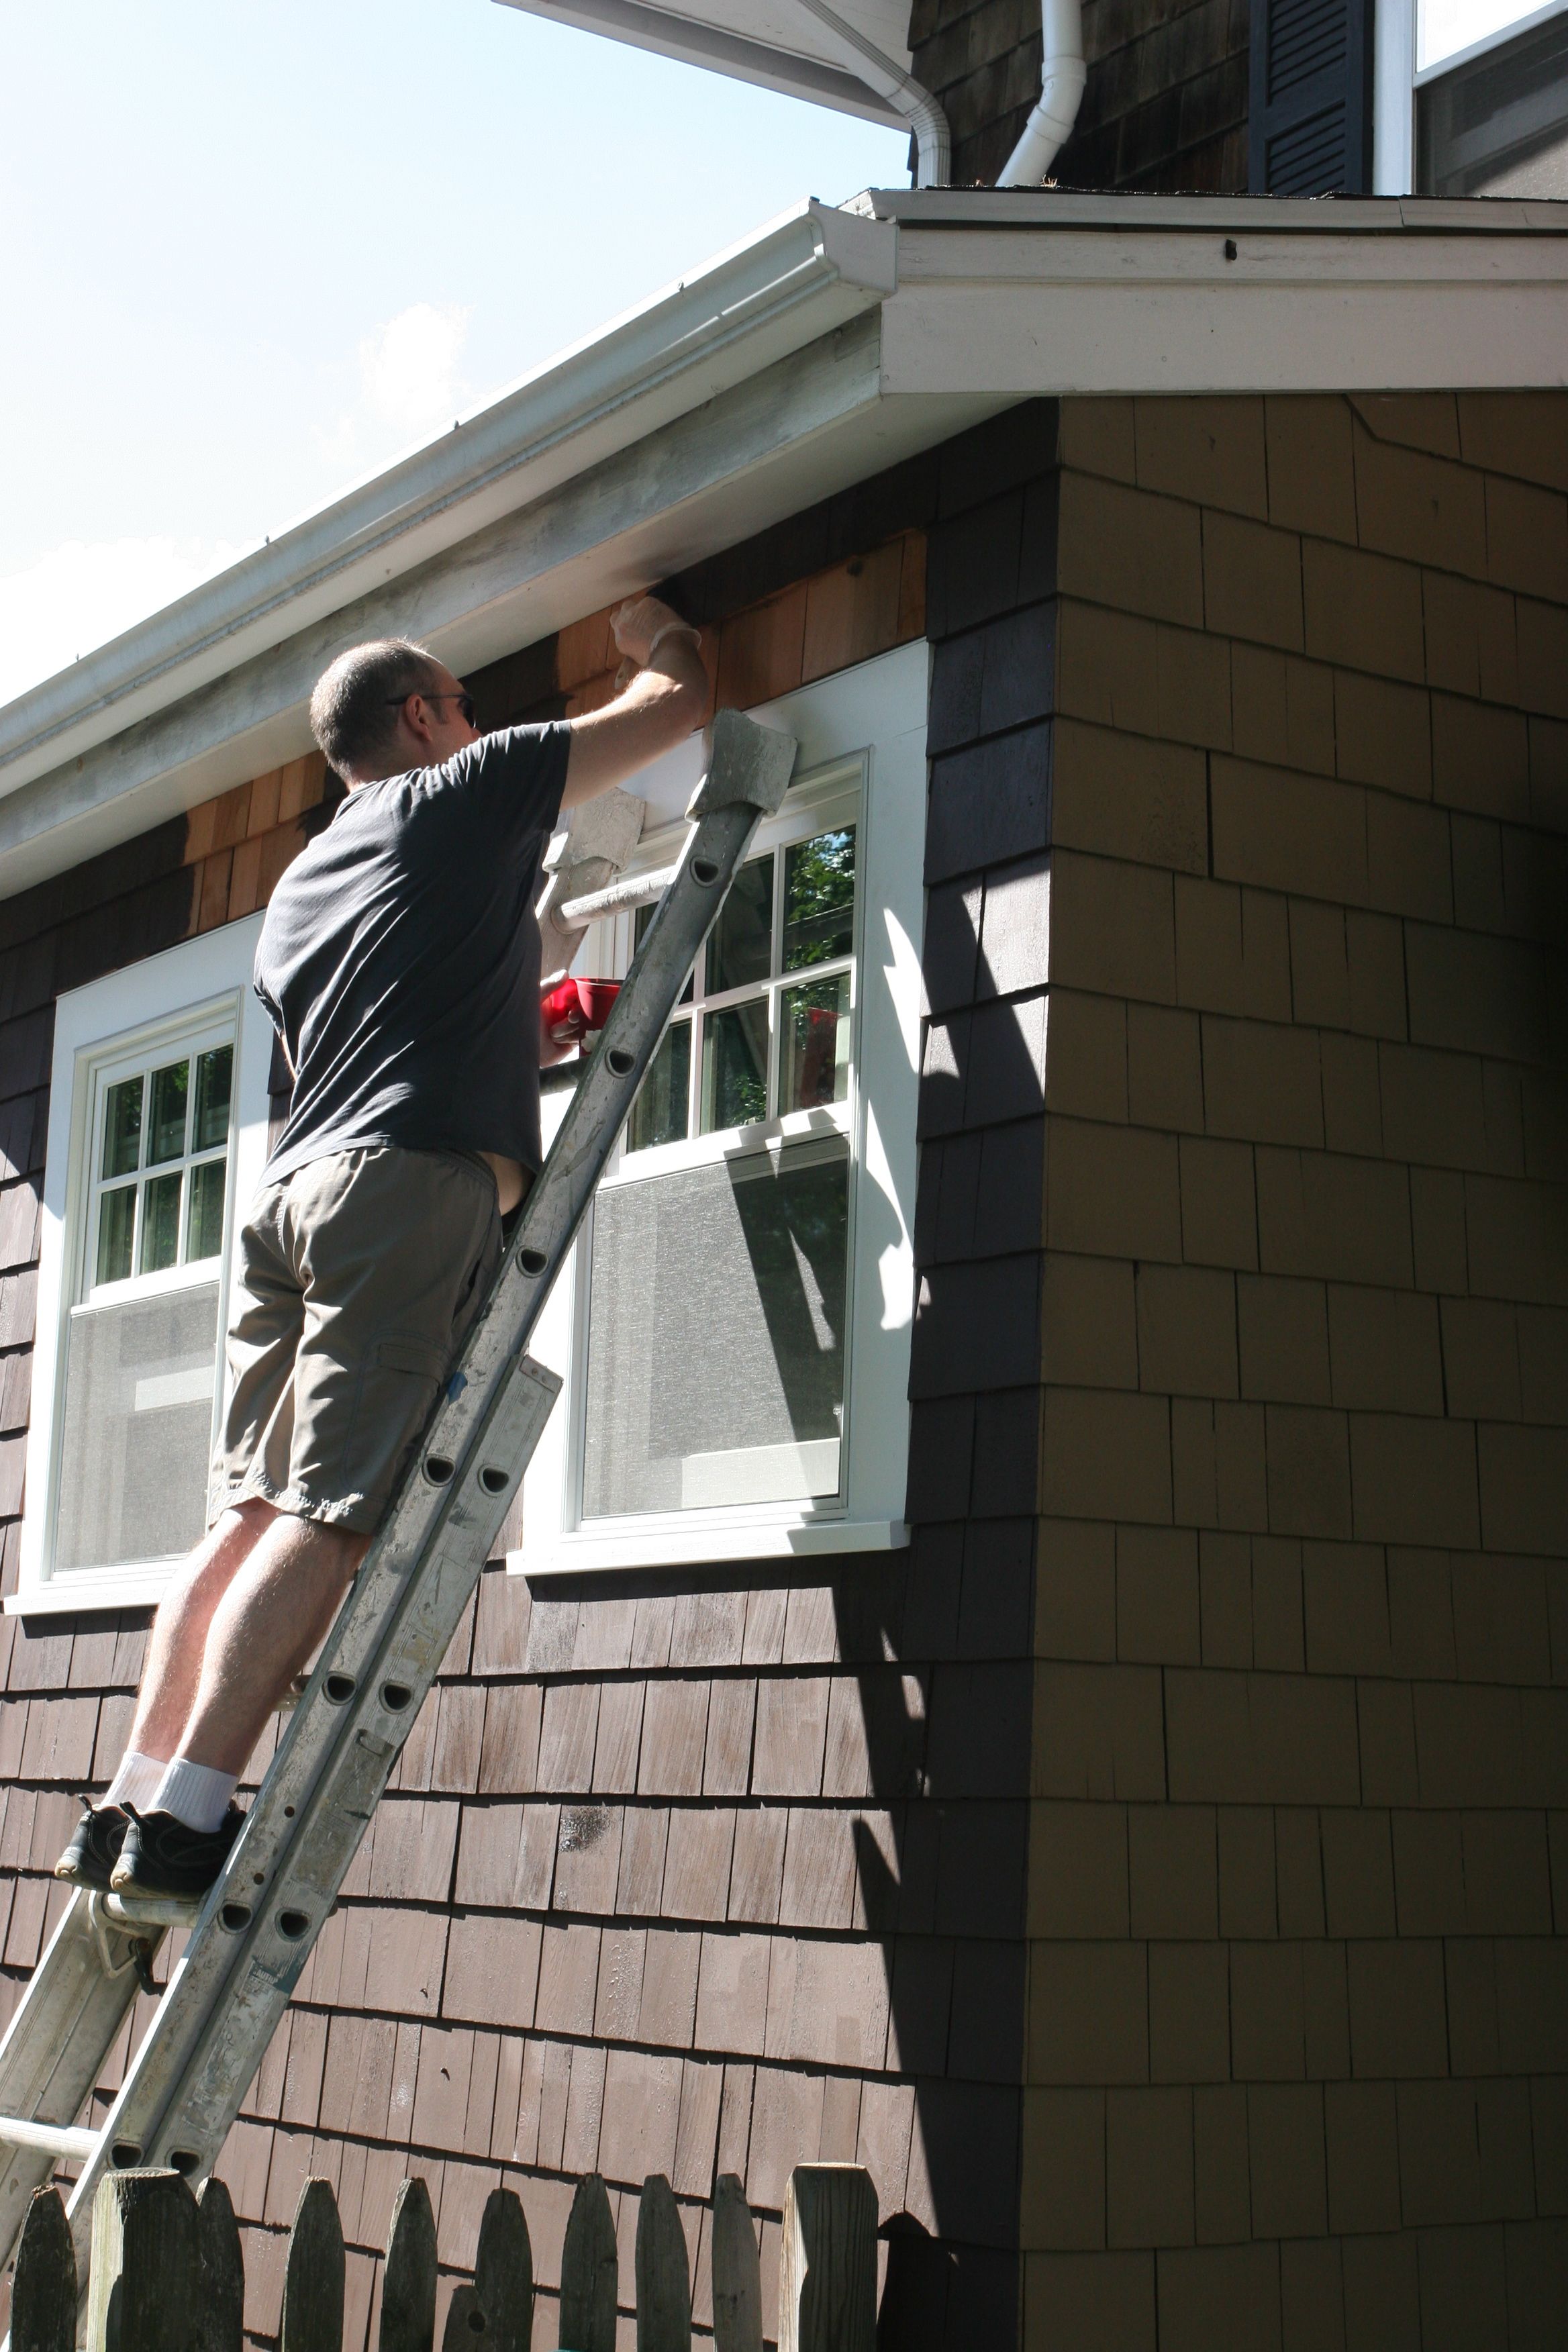 I couldn't reach some of the super high shingles, so mainly Jeff did those. It was a tiny bit scary up on that ladder.